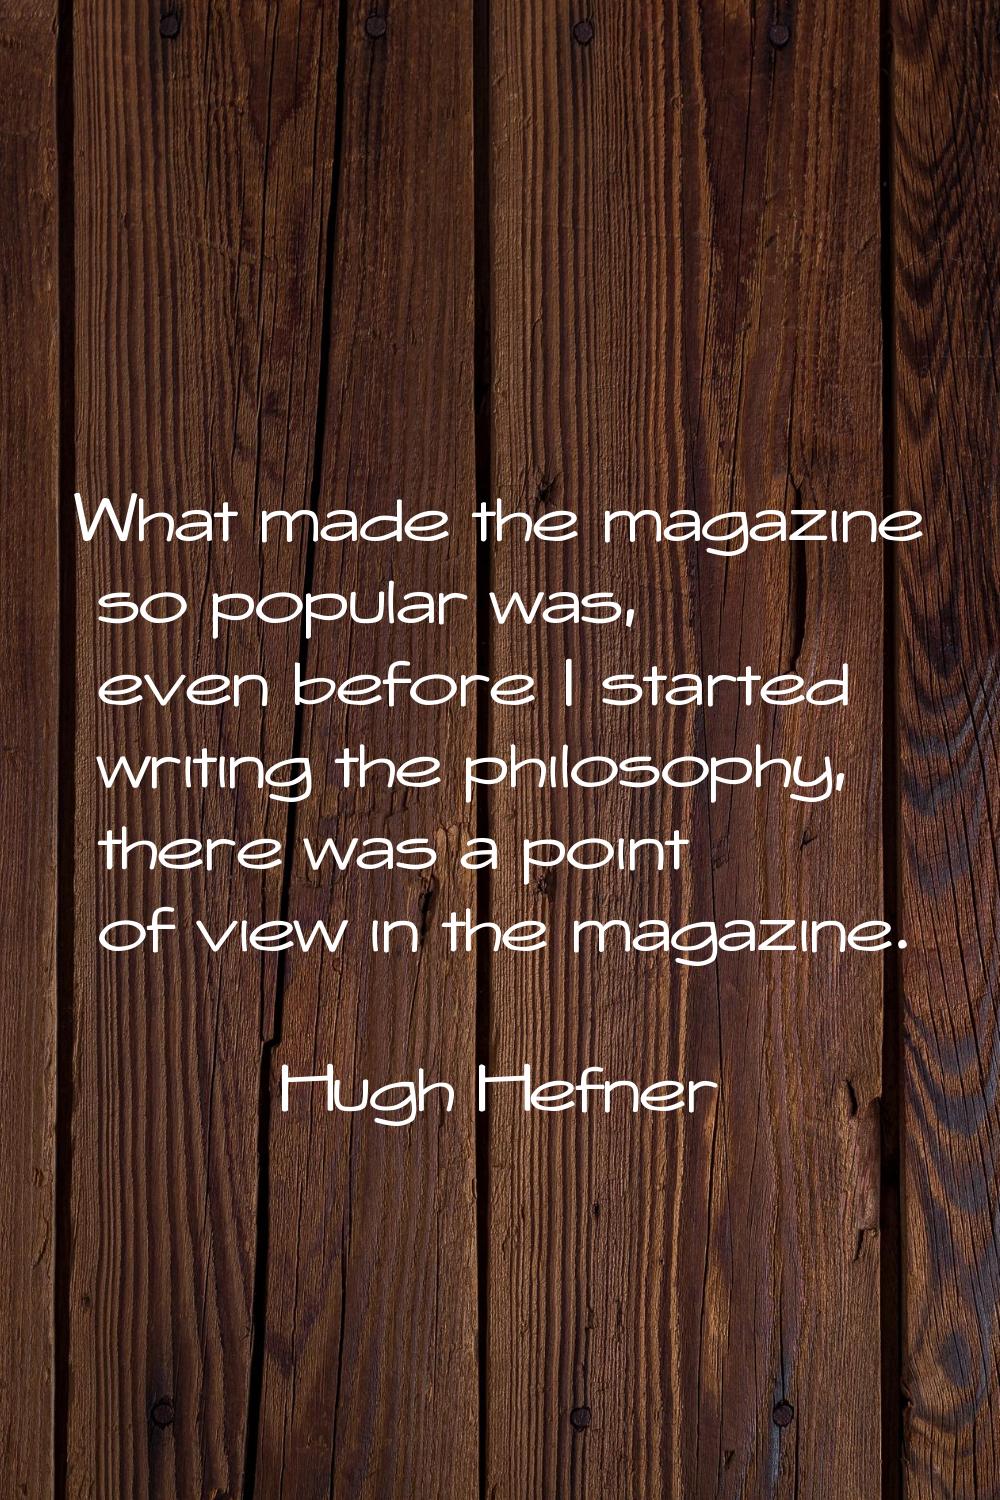 What made the magazine so popular was, even before I started writing the philosophy, there was a po